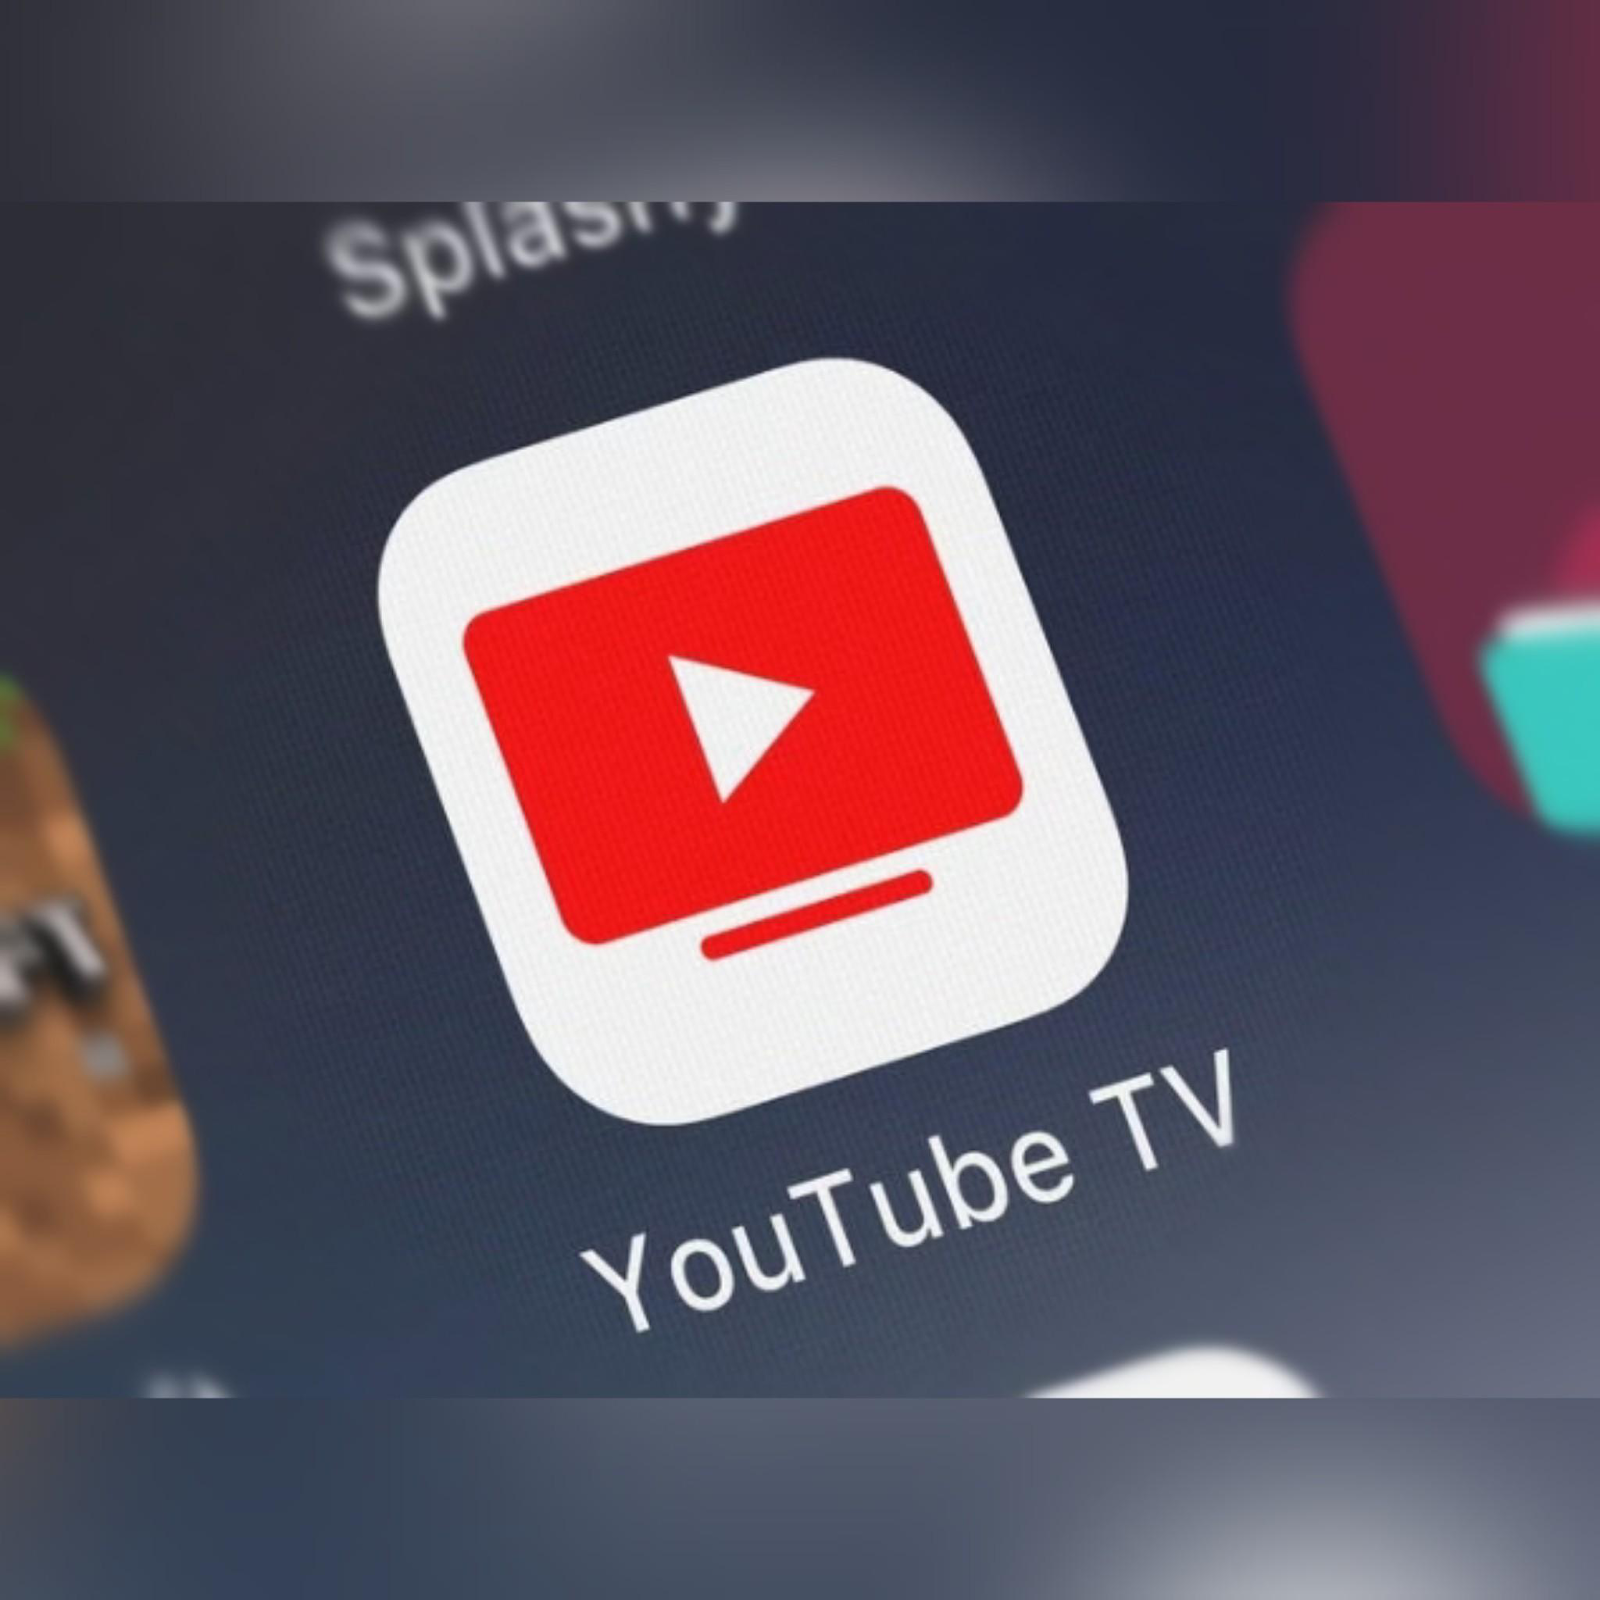 Tap the YouTube TV app on your Home screen or app library.